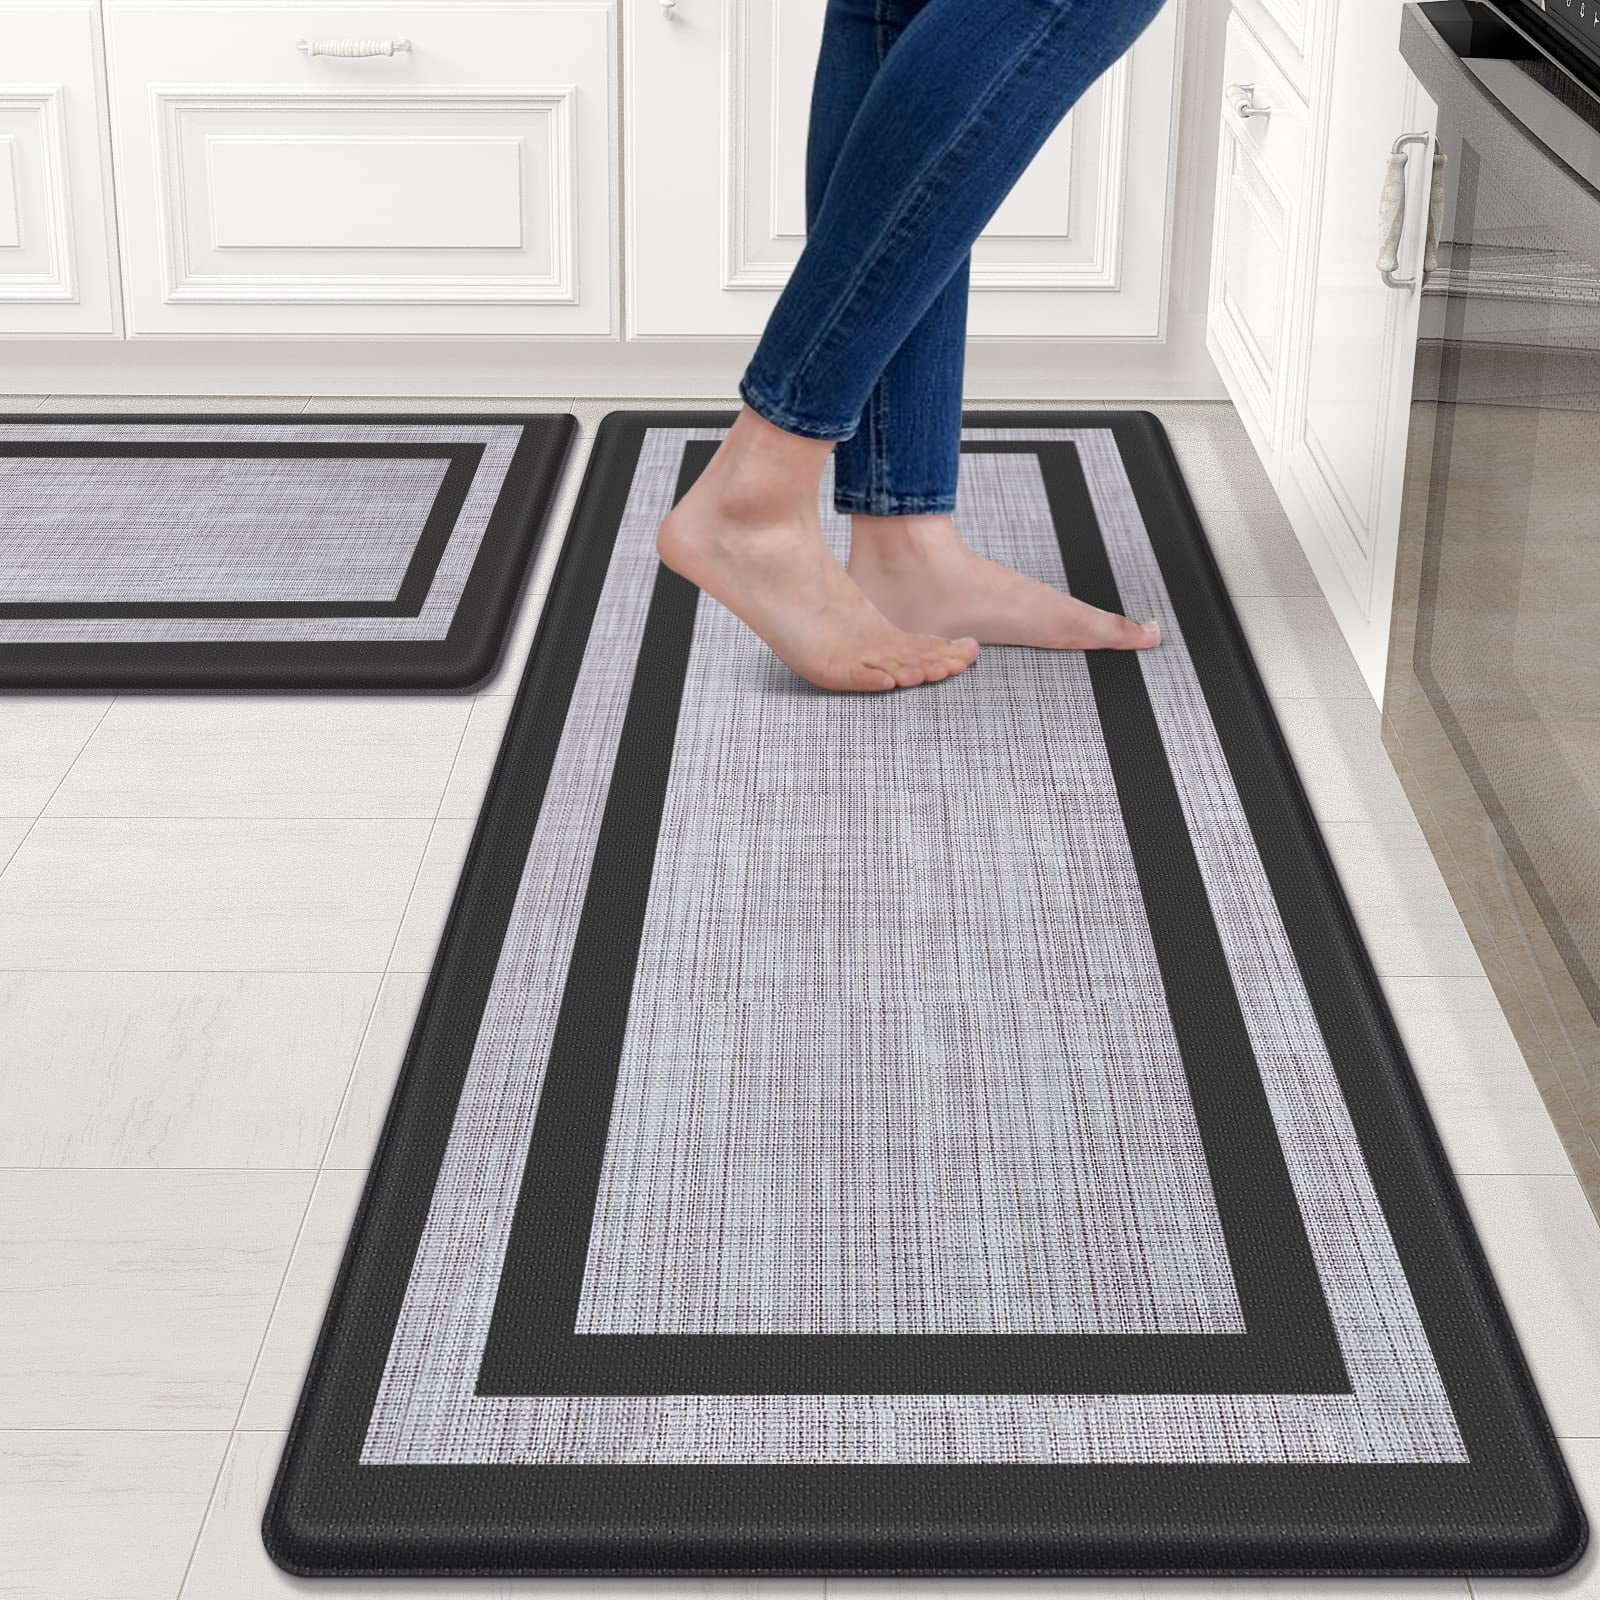 KitchenLit Kitchen Mat (2 PCS), Cushioned Anti Fatigue Kitchen Rug,  Stainproof Kitchen Rugs and Mats Non Skid Washable, Memory Foam Kitchen Rug  Set, Heavy Duty …